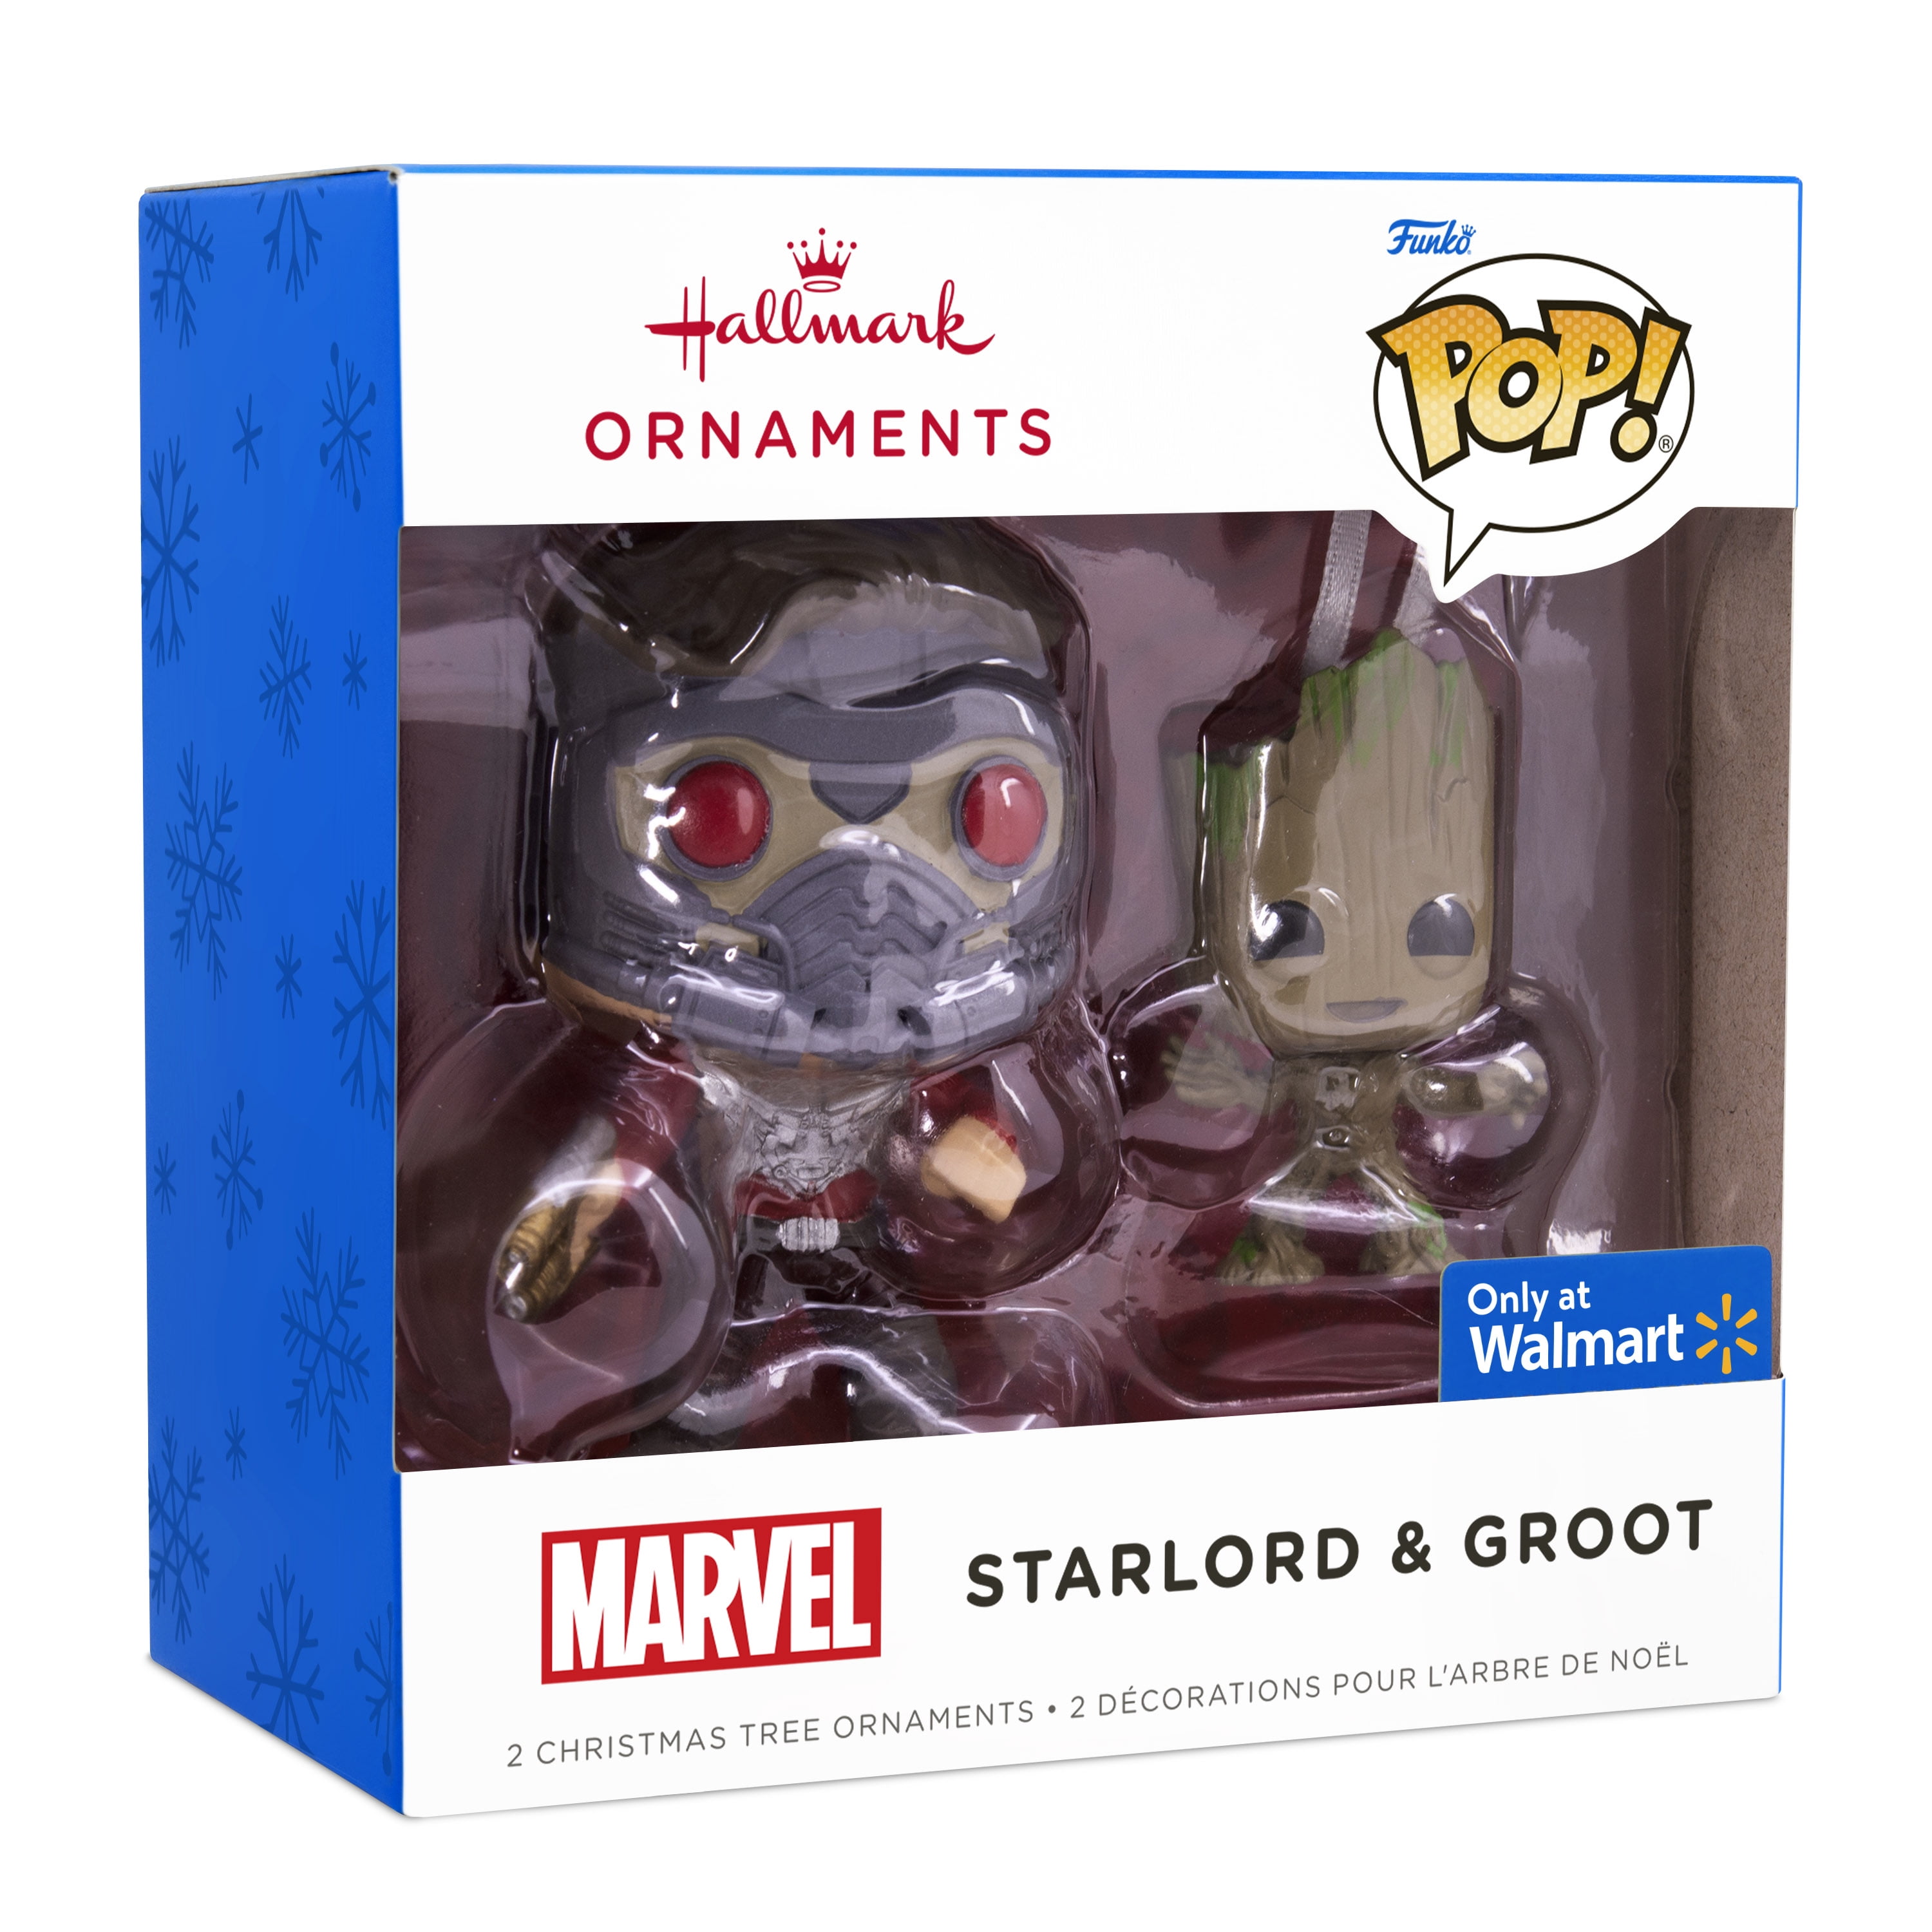 Hallmark Marvel Mystery Ornaments (Guardians of the Galaxy Star-Lord and Groot Funko POP!, Set of 2) - Limited Availability